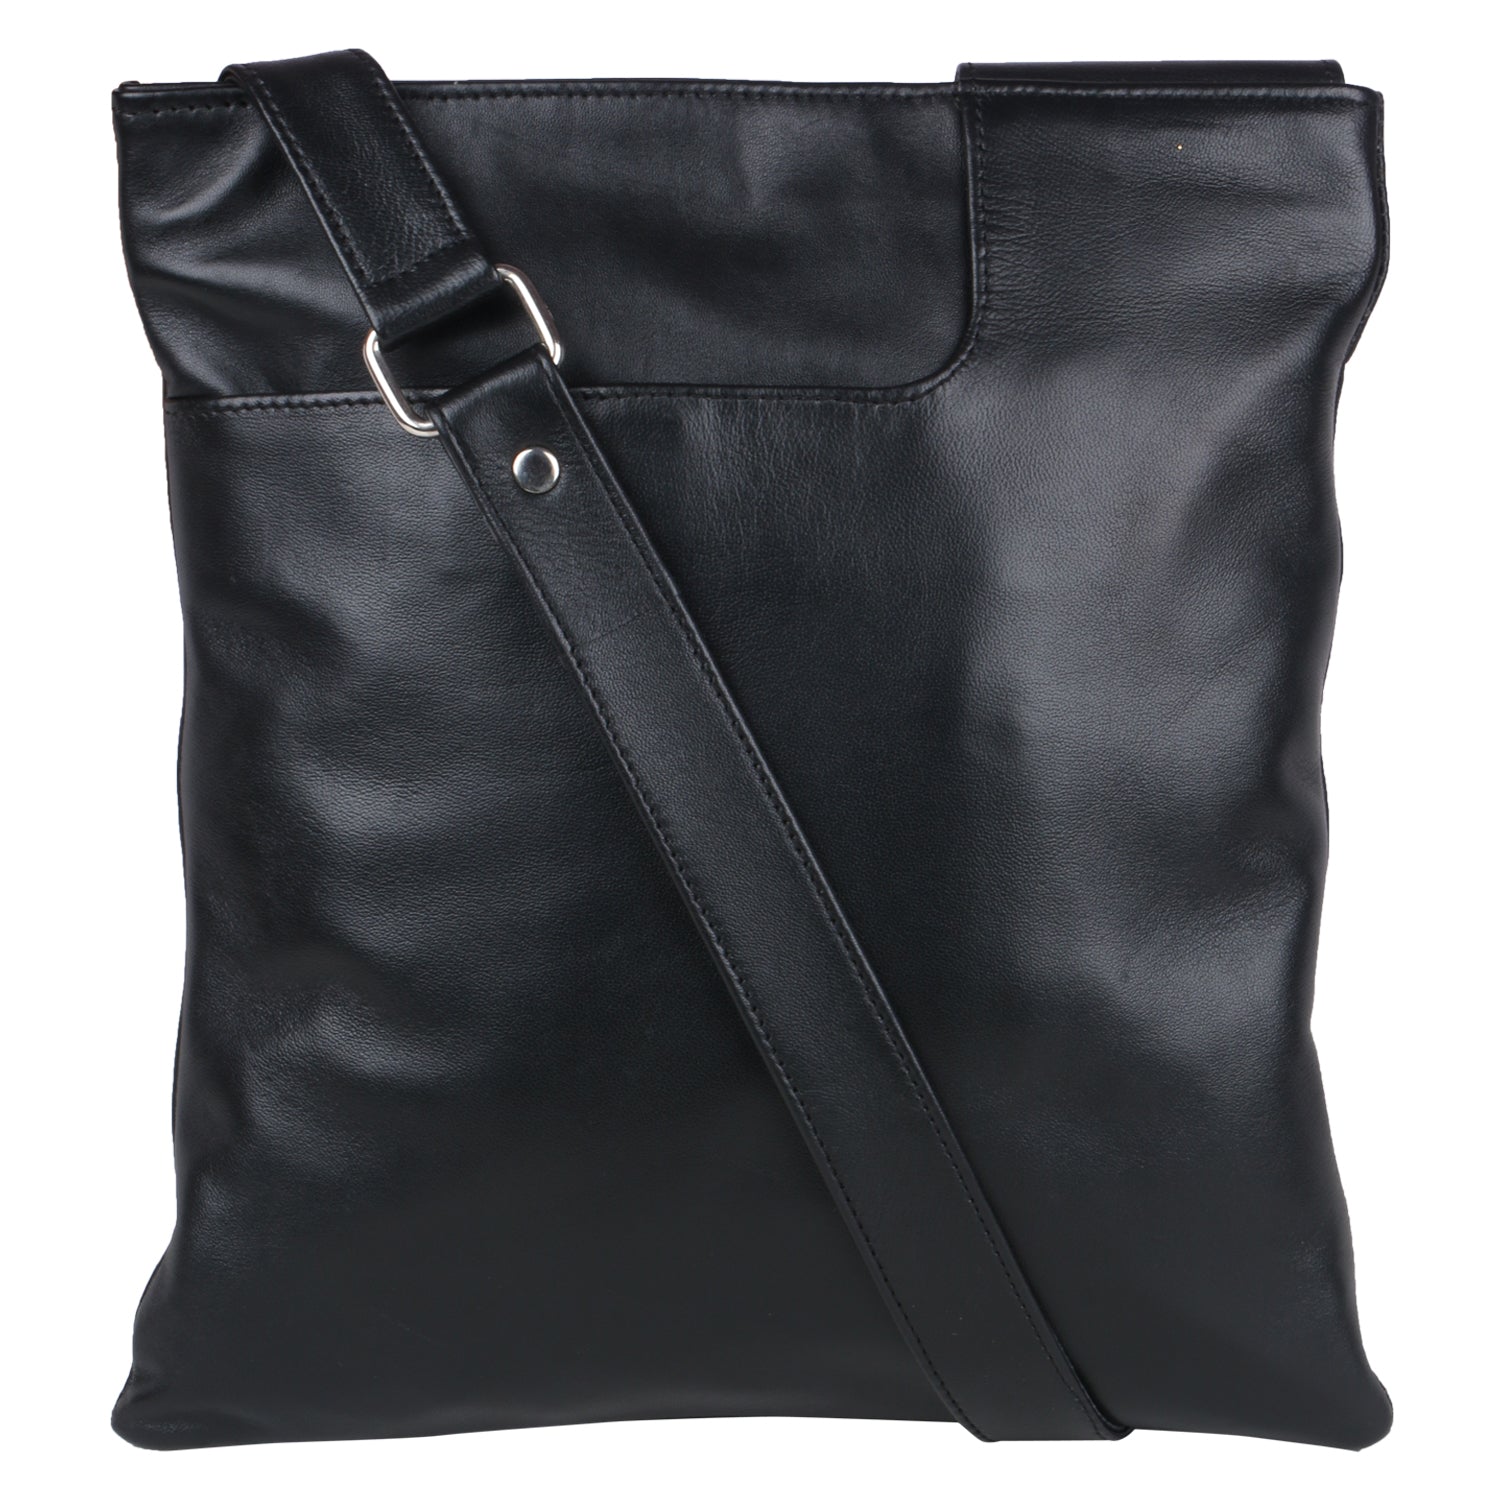 front image of FLAT CROSS BODY HAND BAG